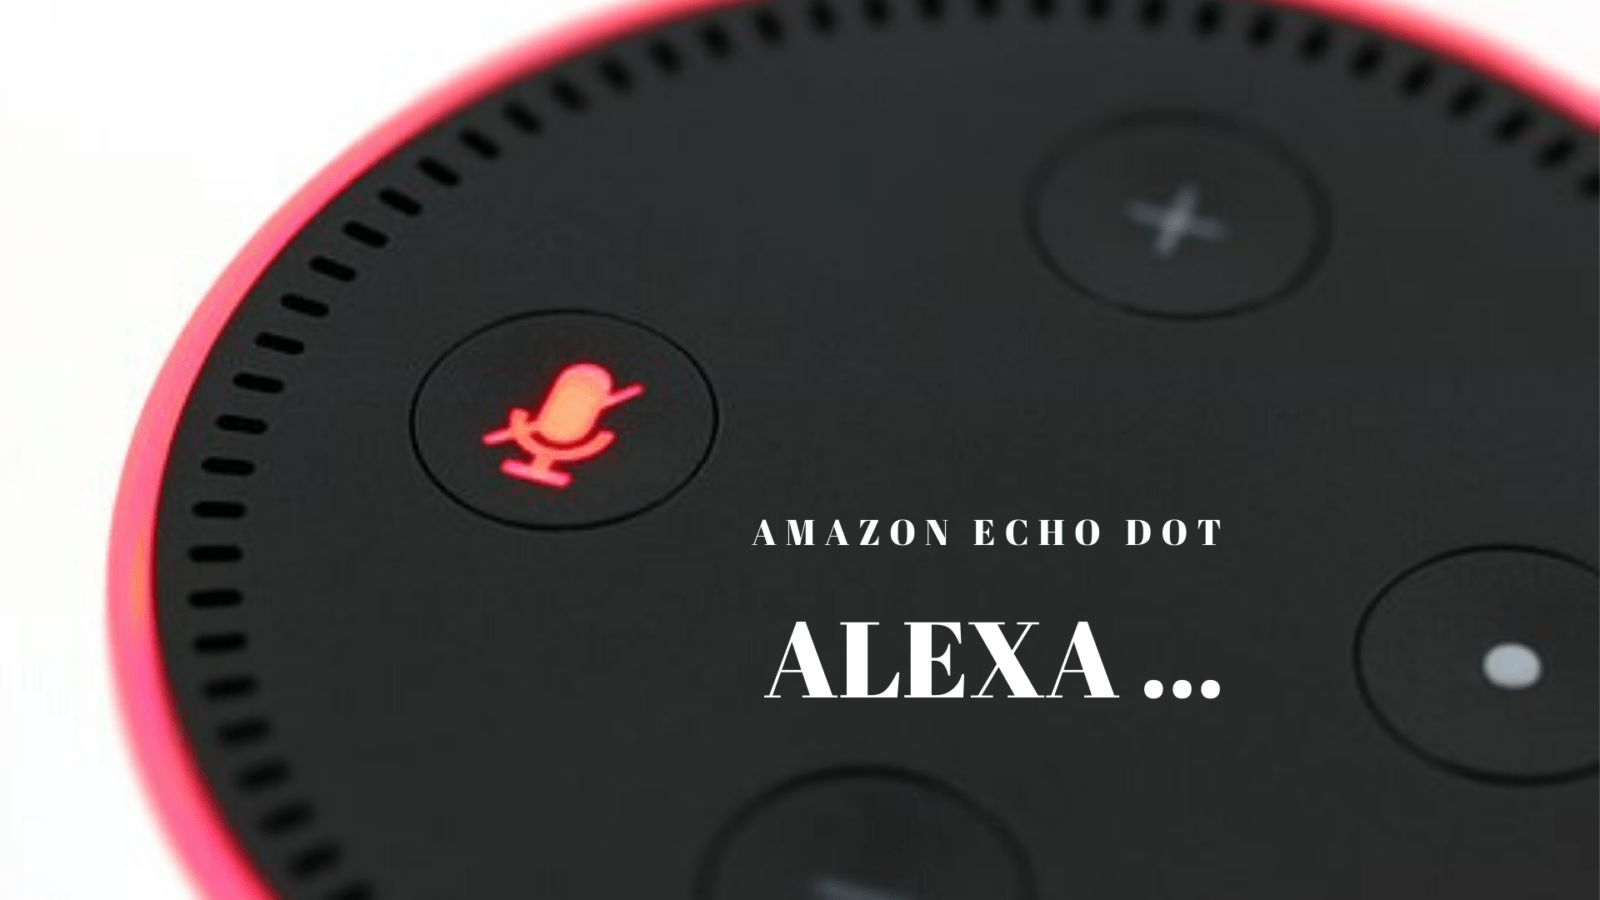 65+ Things You Can Do With Your Amazon Echo Dot